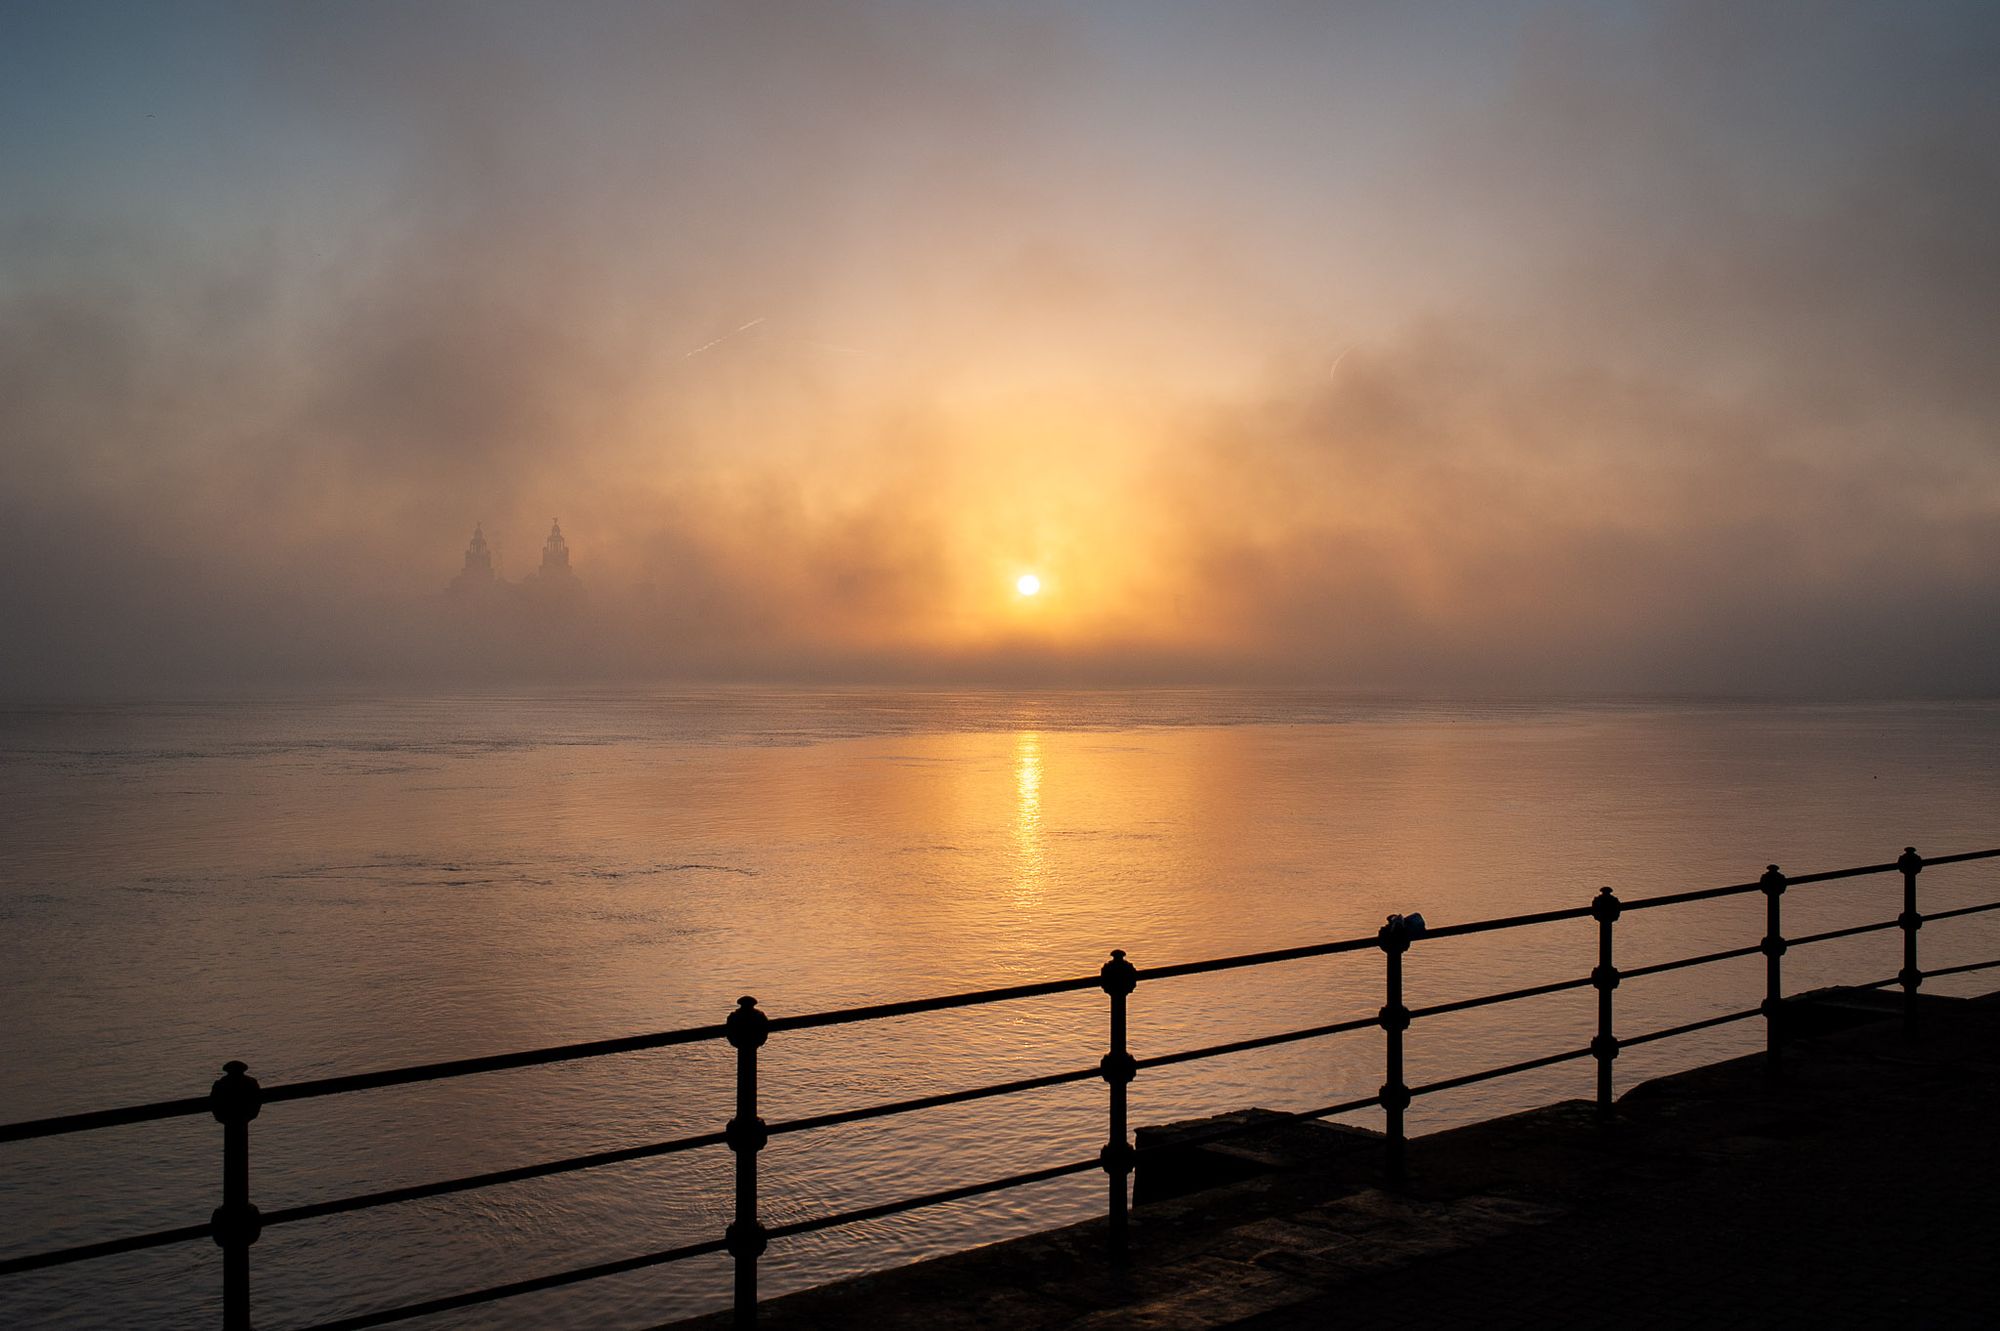 A foggy sunrise over the River Mersey. The Liver Building is barely visible through the fog.